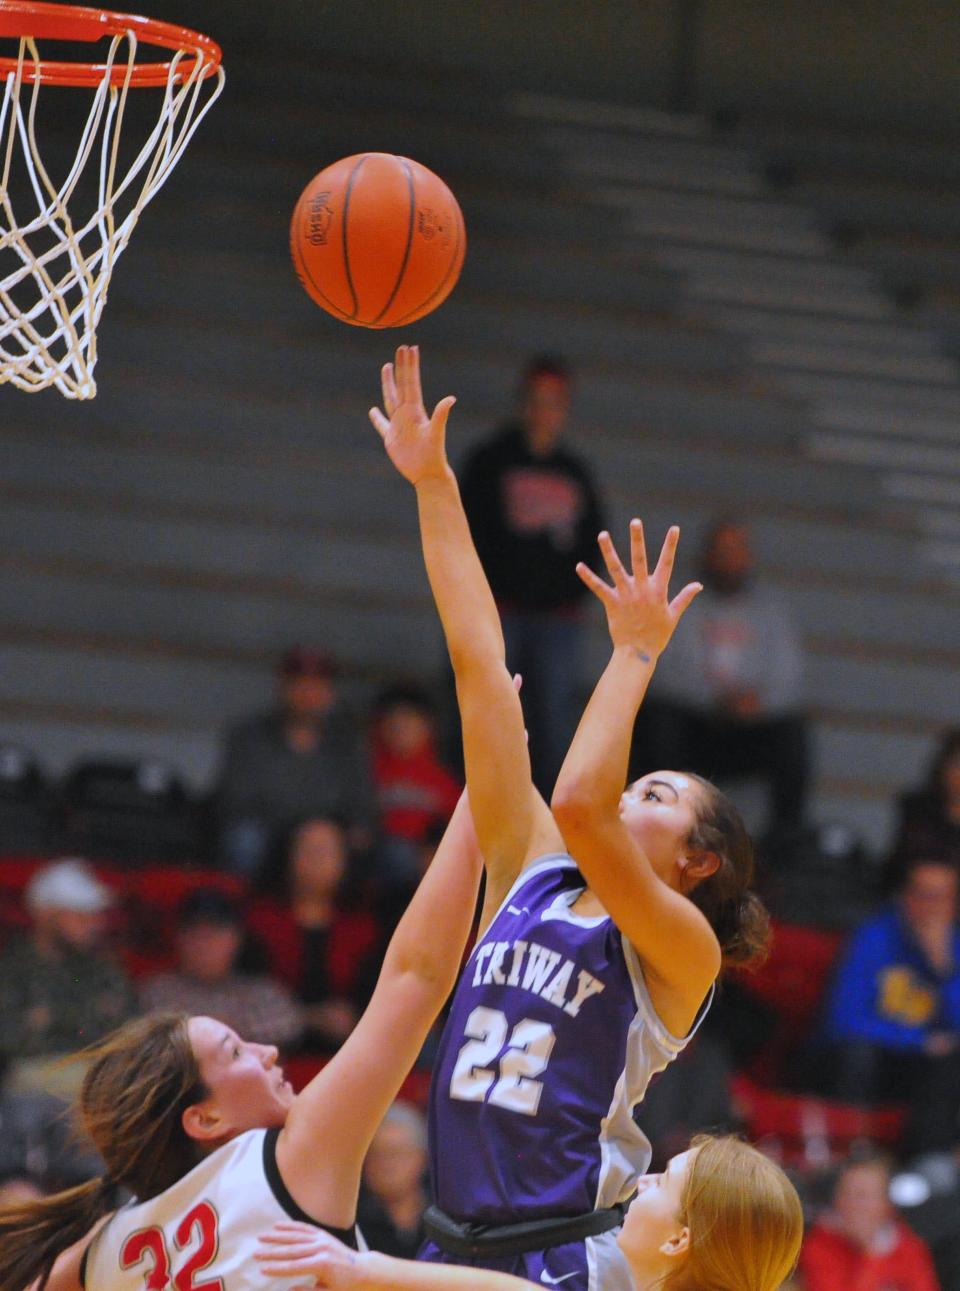 Triway's Leah Wirth puts up a short jump shot in the lane against Columbiana's Lilly Hoschar and Ellie Venezia.